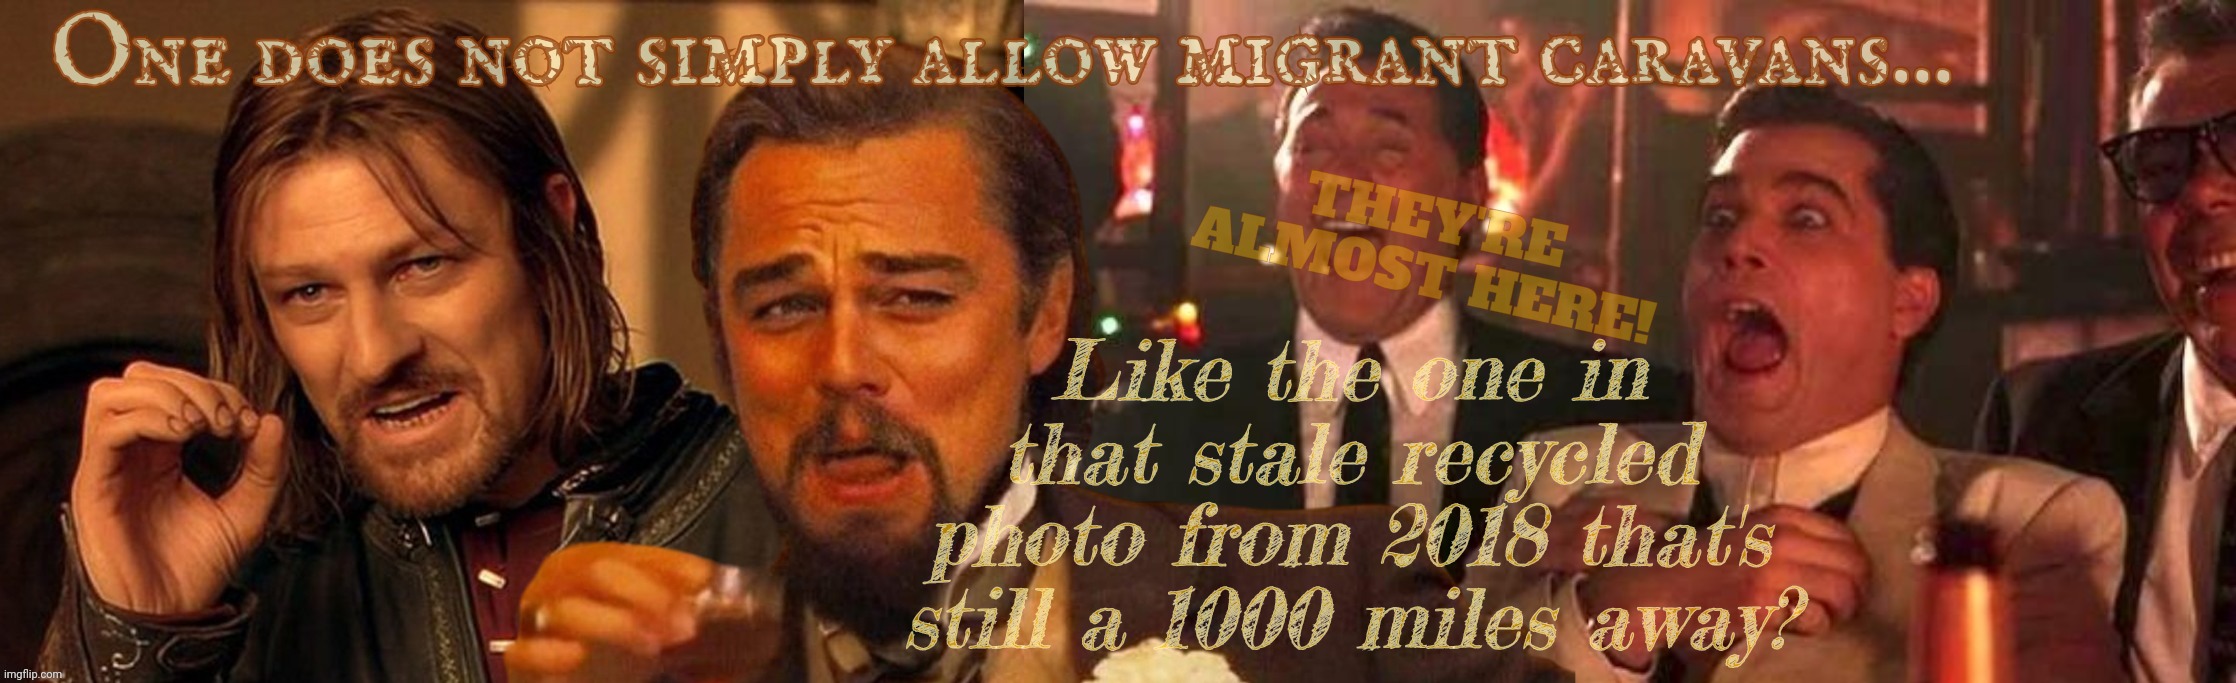 The 2018 Migrant Caravan still cometh,,, | One does not simply allow migrant caravans... Like the one in that stale recycled photo from 2018 that's still a 1000 miles away? THEY'RE ALMOST HERE! | image tagged in one does not simply laughing leo goodfellas laughing,2018 migrant caravan,it's 2024,still a thousand miles away,any day now | made w/ Imgflip meme maker